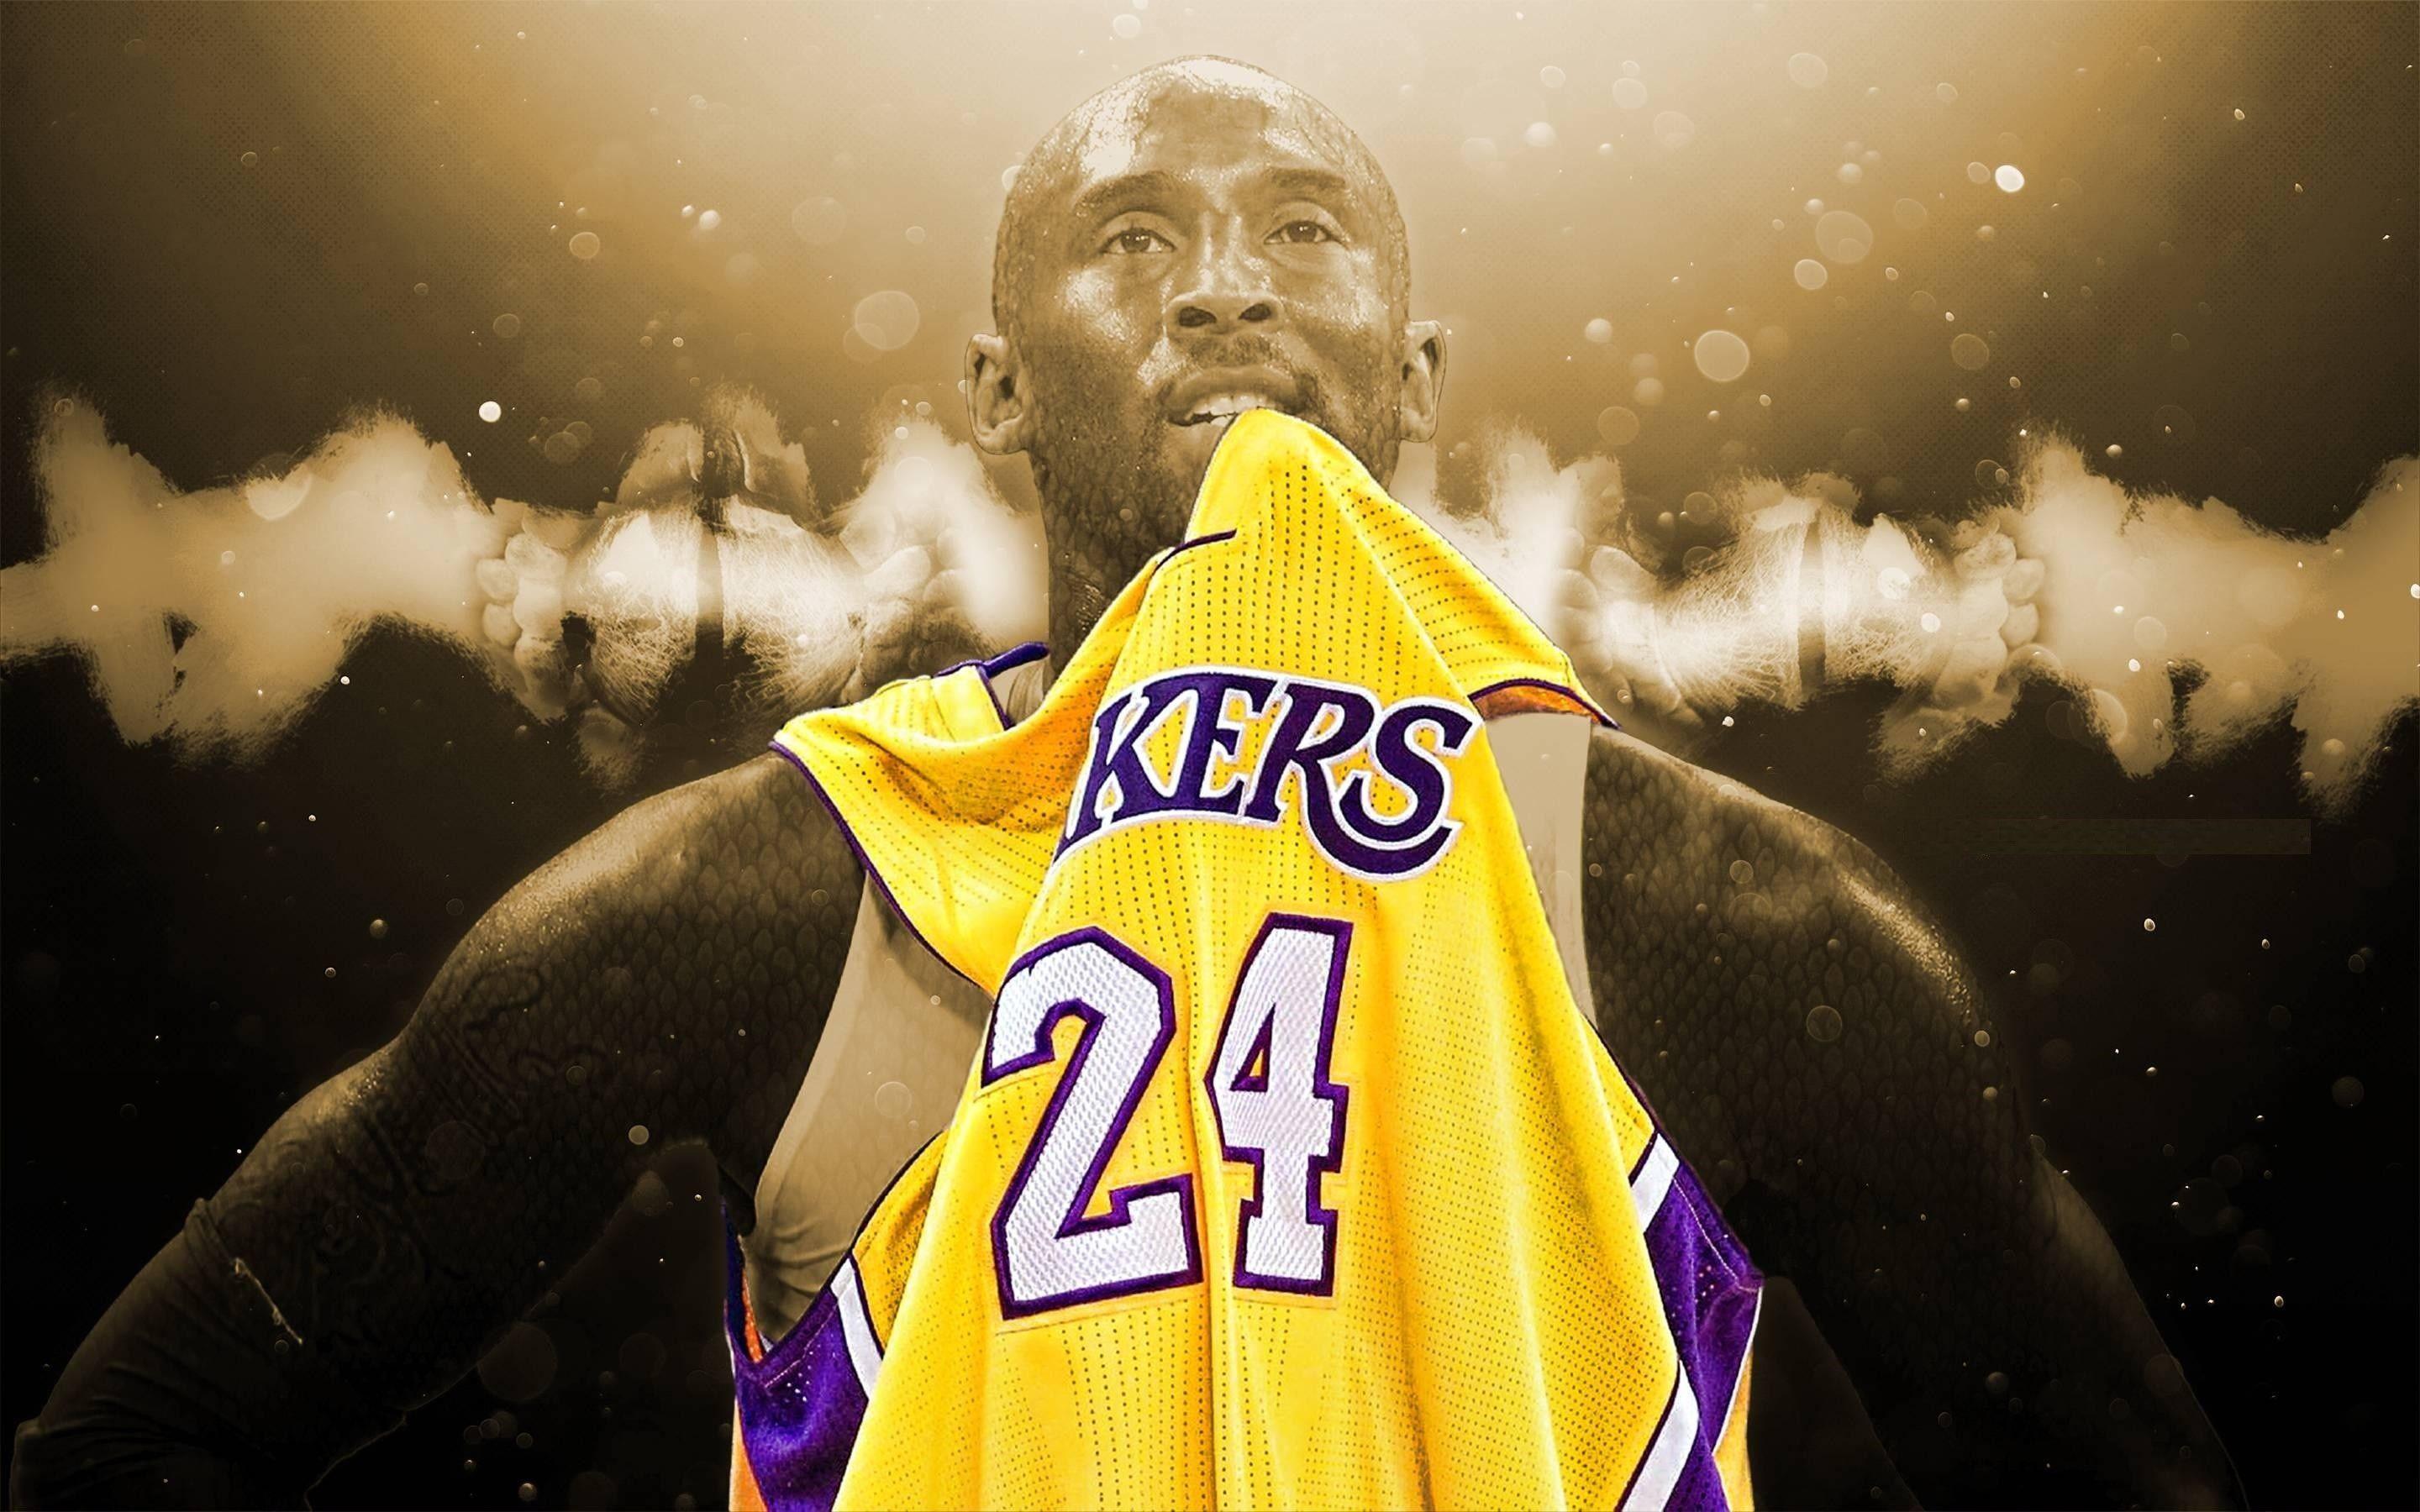 Kobe Bryant is the best basketball player of all time - Kobe Bryant